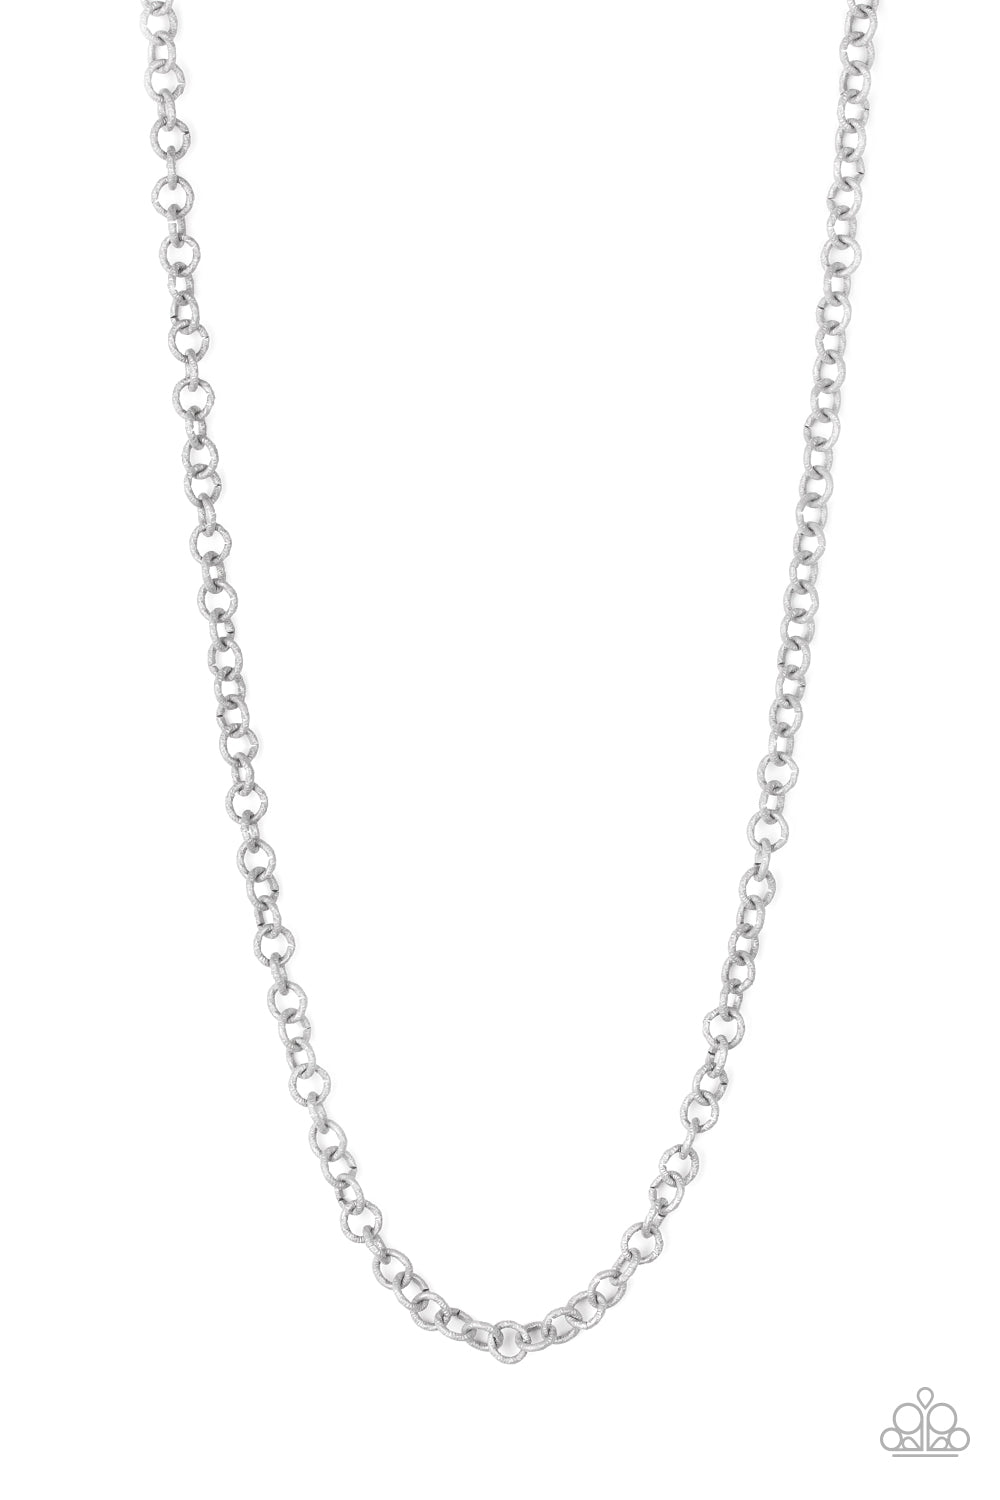 Courtside Couture Silver Urban Necklace - Paparazzi Accessories